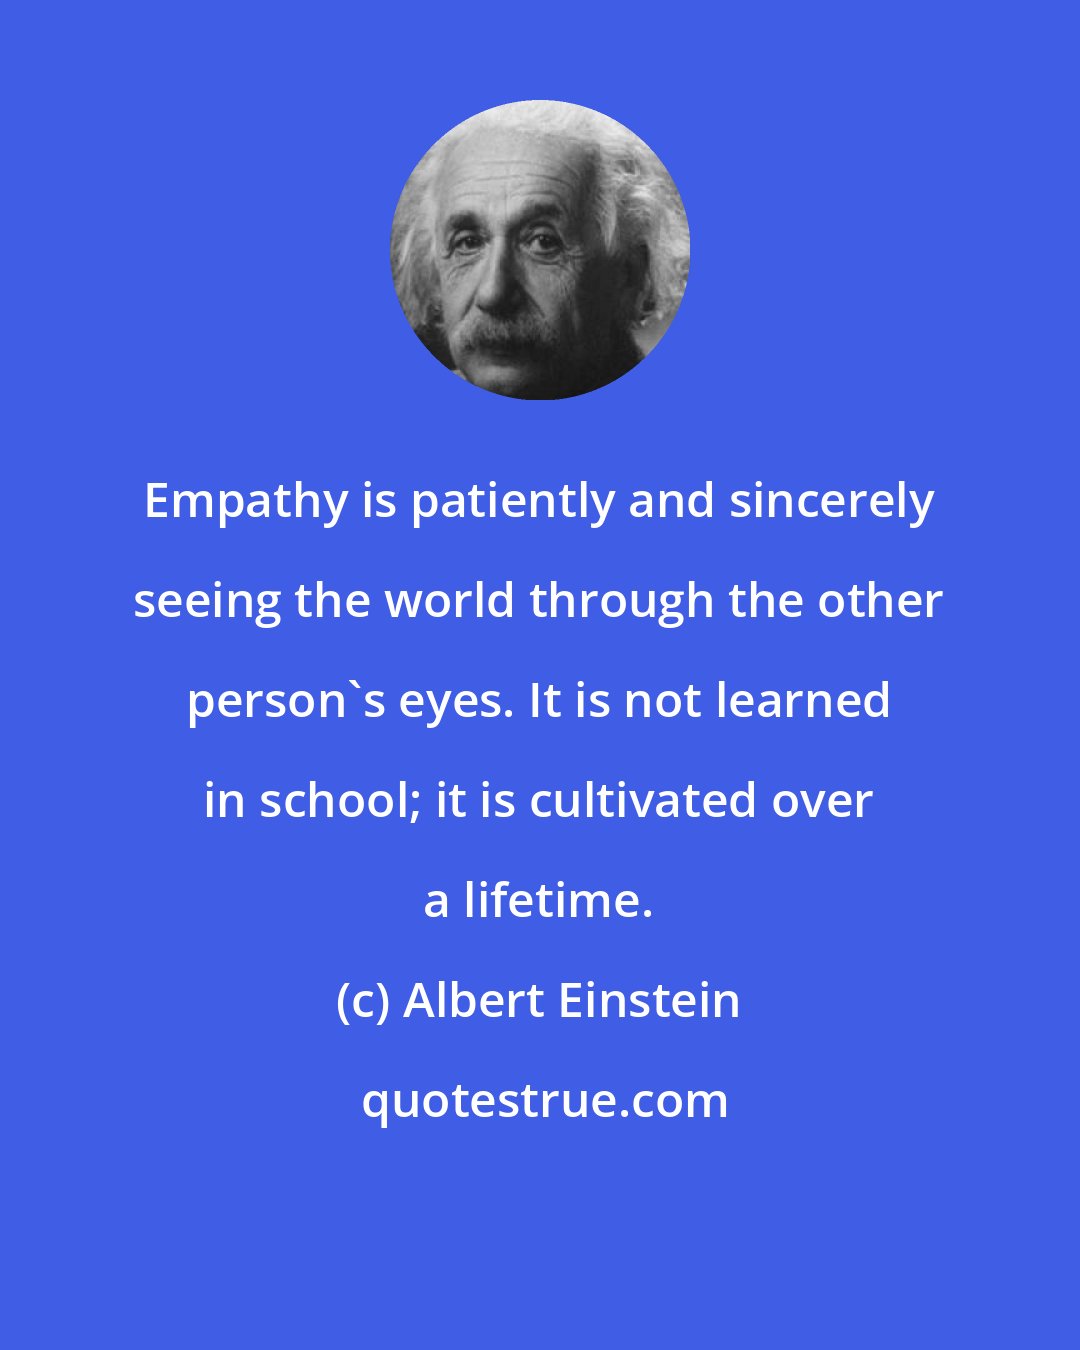 Albert Einstein: Empathy is patiently and sincerely seeing the world through the other person's eyes. It is not learned in school; it is cultivated over a lifetime.